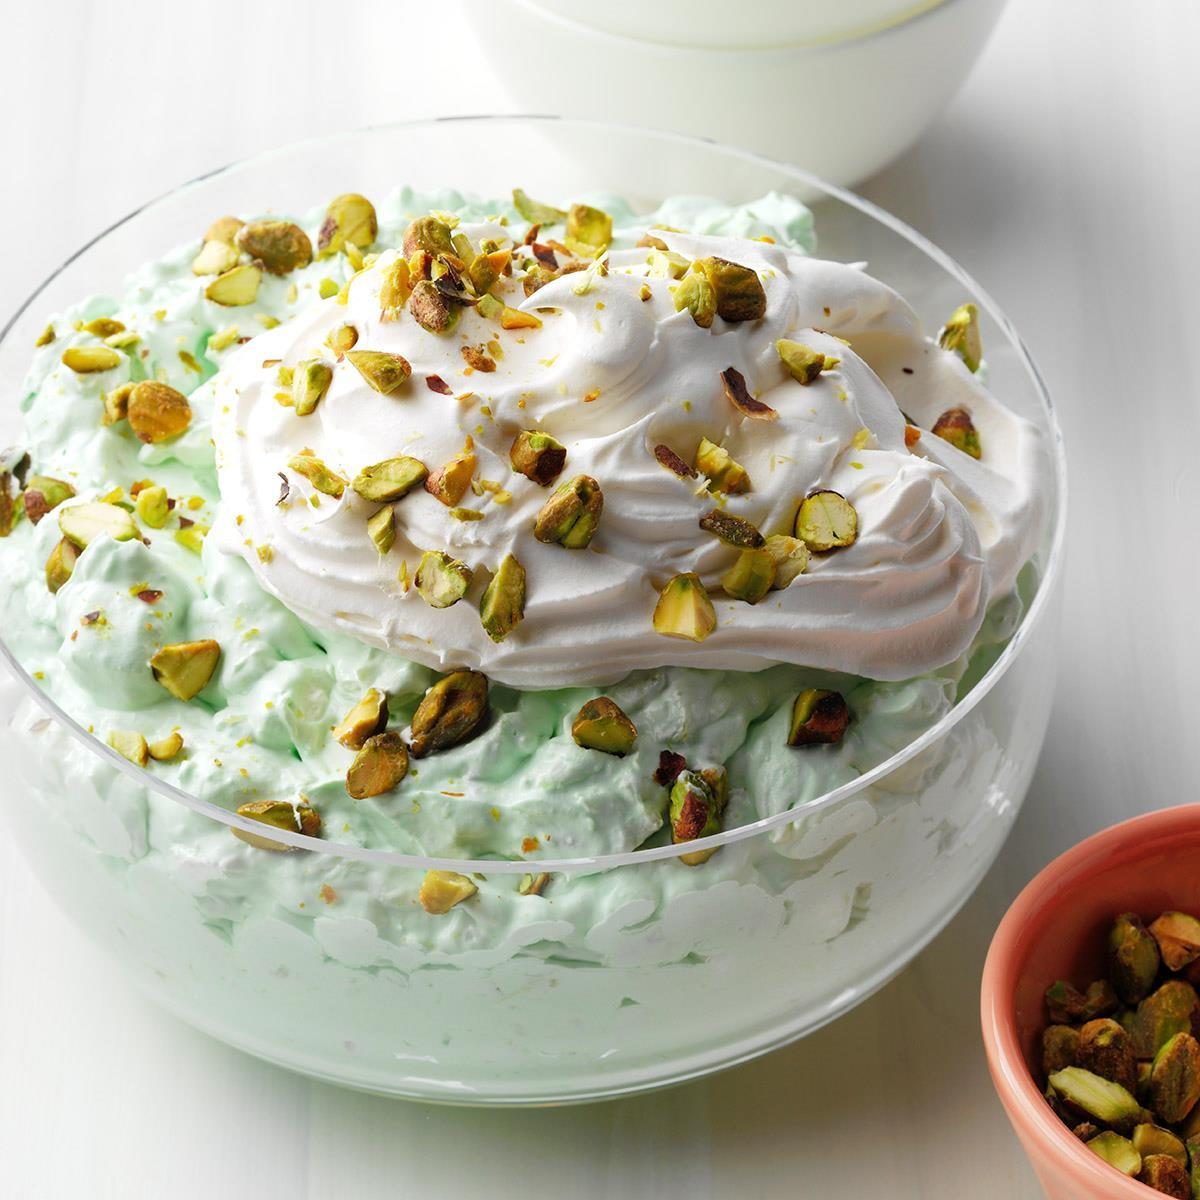 <p>This fluffy pistachio salad is a real treat since it's creamy but not overly sweet. It's easy to mix up, and the flavor gets better the longer it stands. —Pattie Ann Forssberg, Logan, Kansas</p> <div class="listicle-page__buttons"> <div class="listicle-page__cta-button"><a href='https://www.tasteofhome.com/recipes/pistachio-mallow-salad/'>Go to Recipe</a></div> </div>